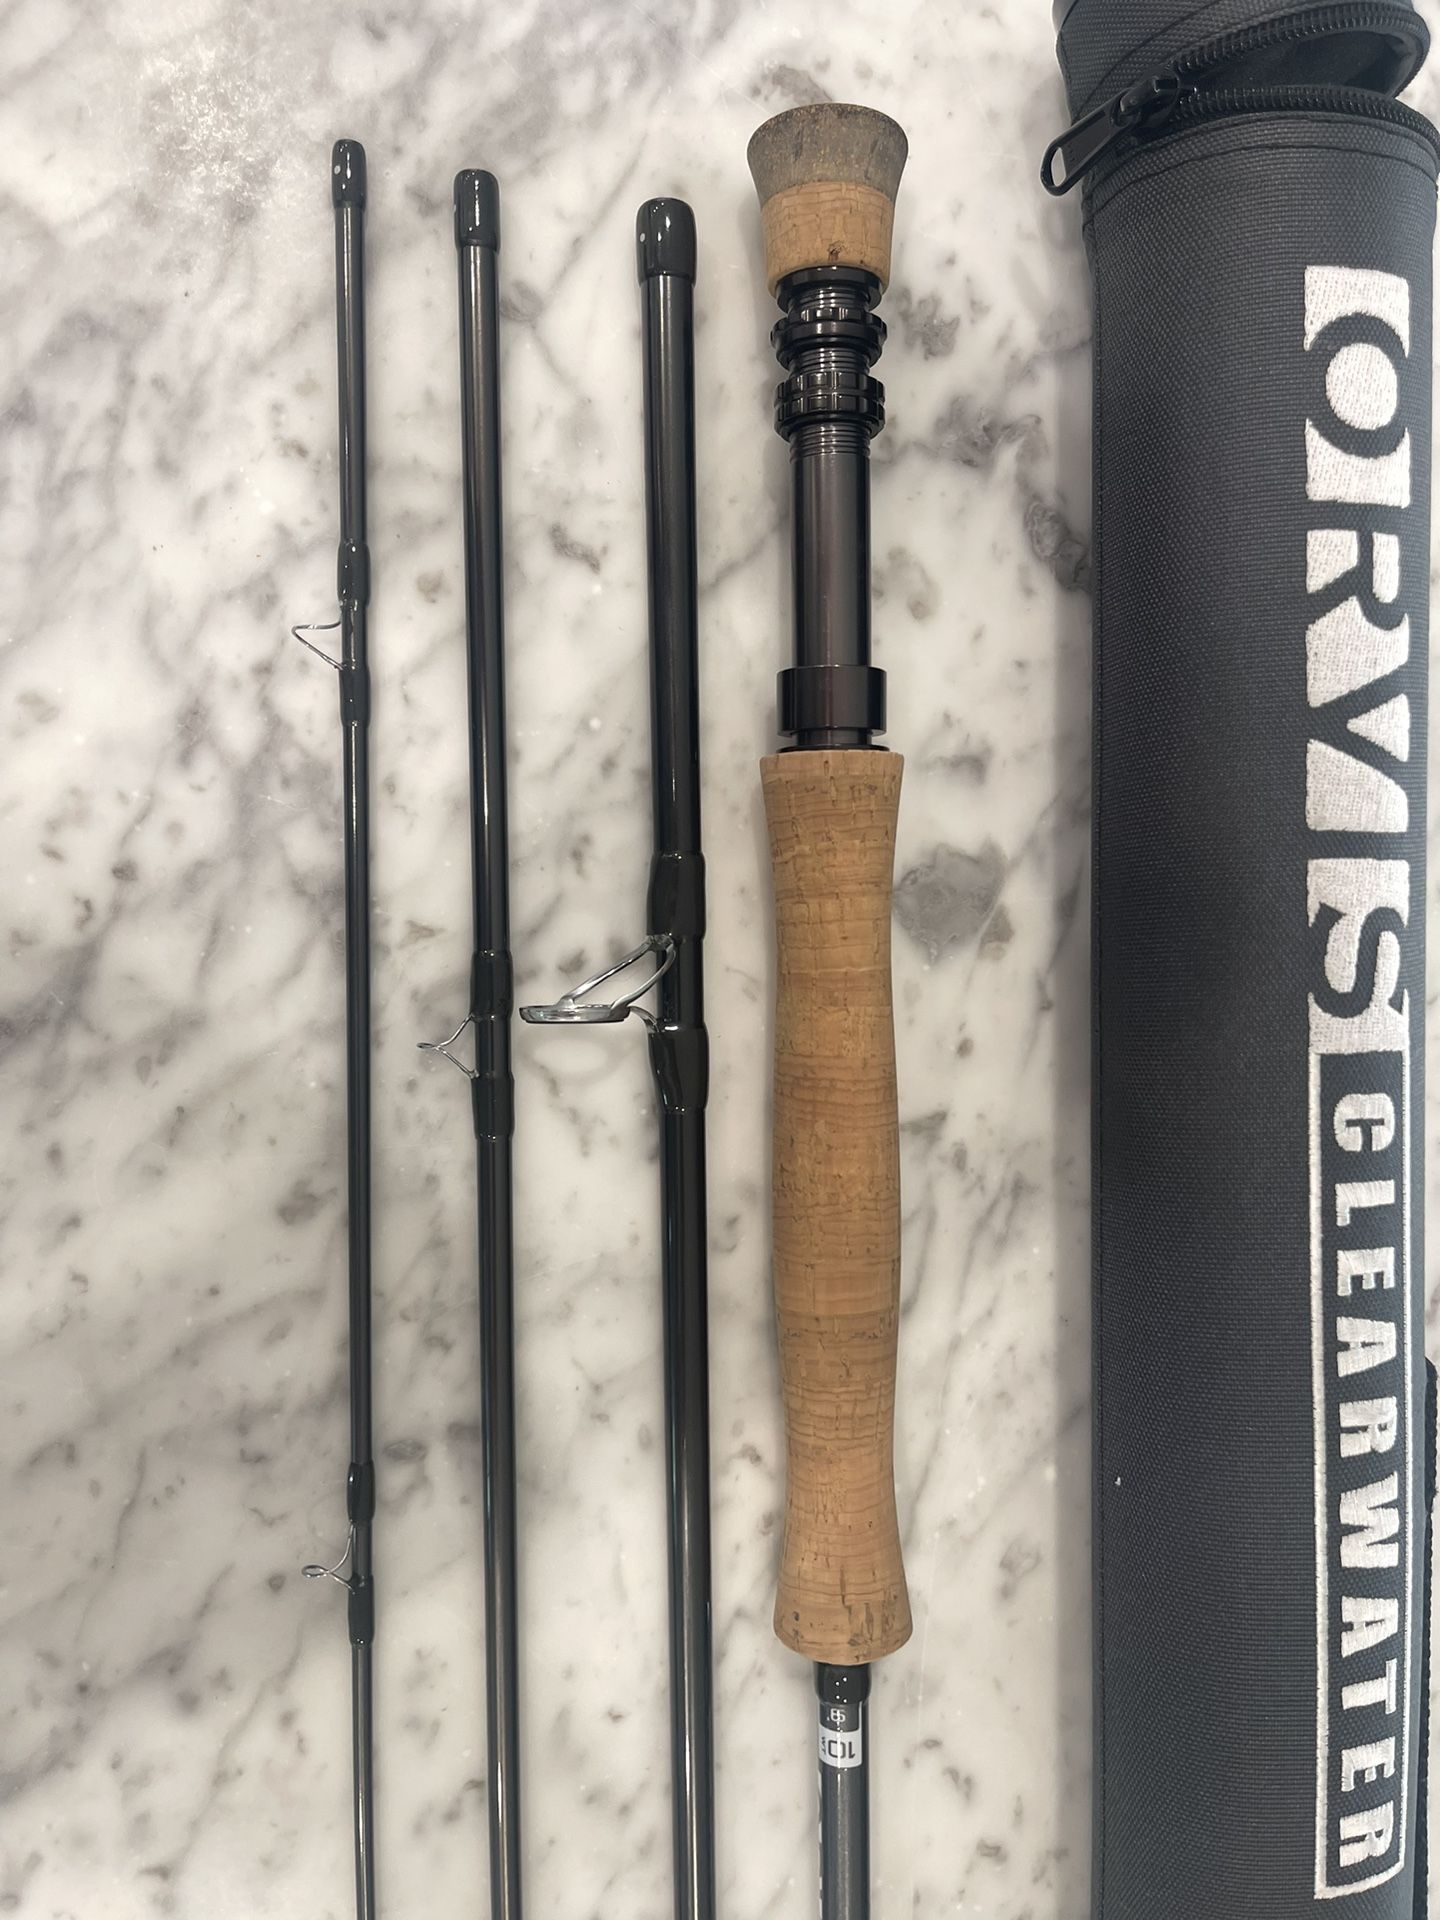 Orvis Clearwater 10wt Rod And Reel. for Sale in Scottsdale, AZ - OfferUp